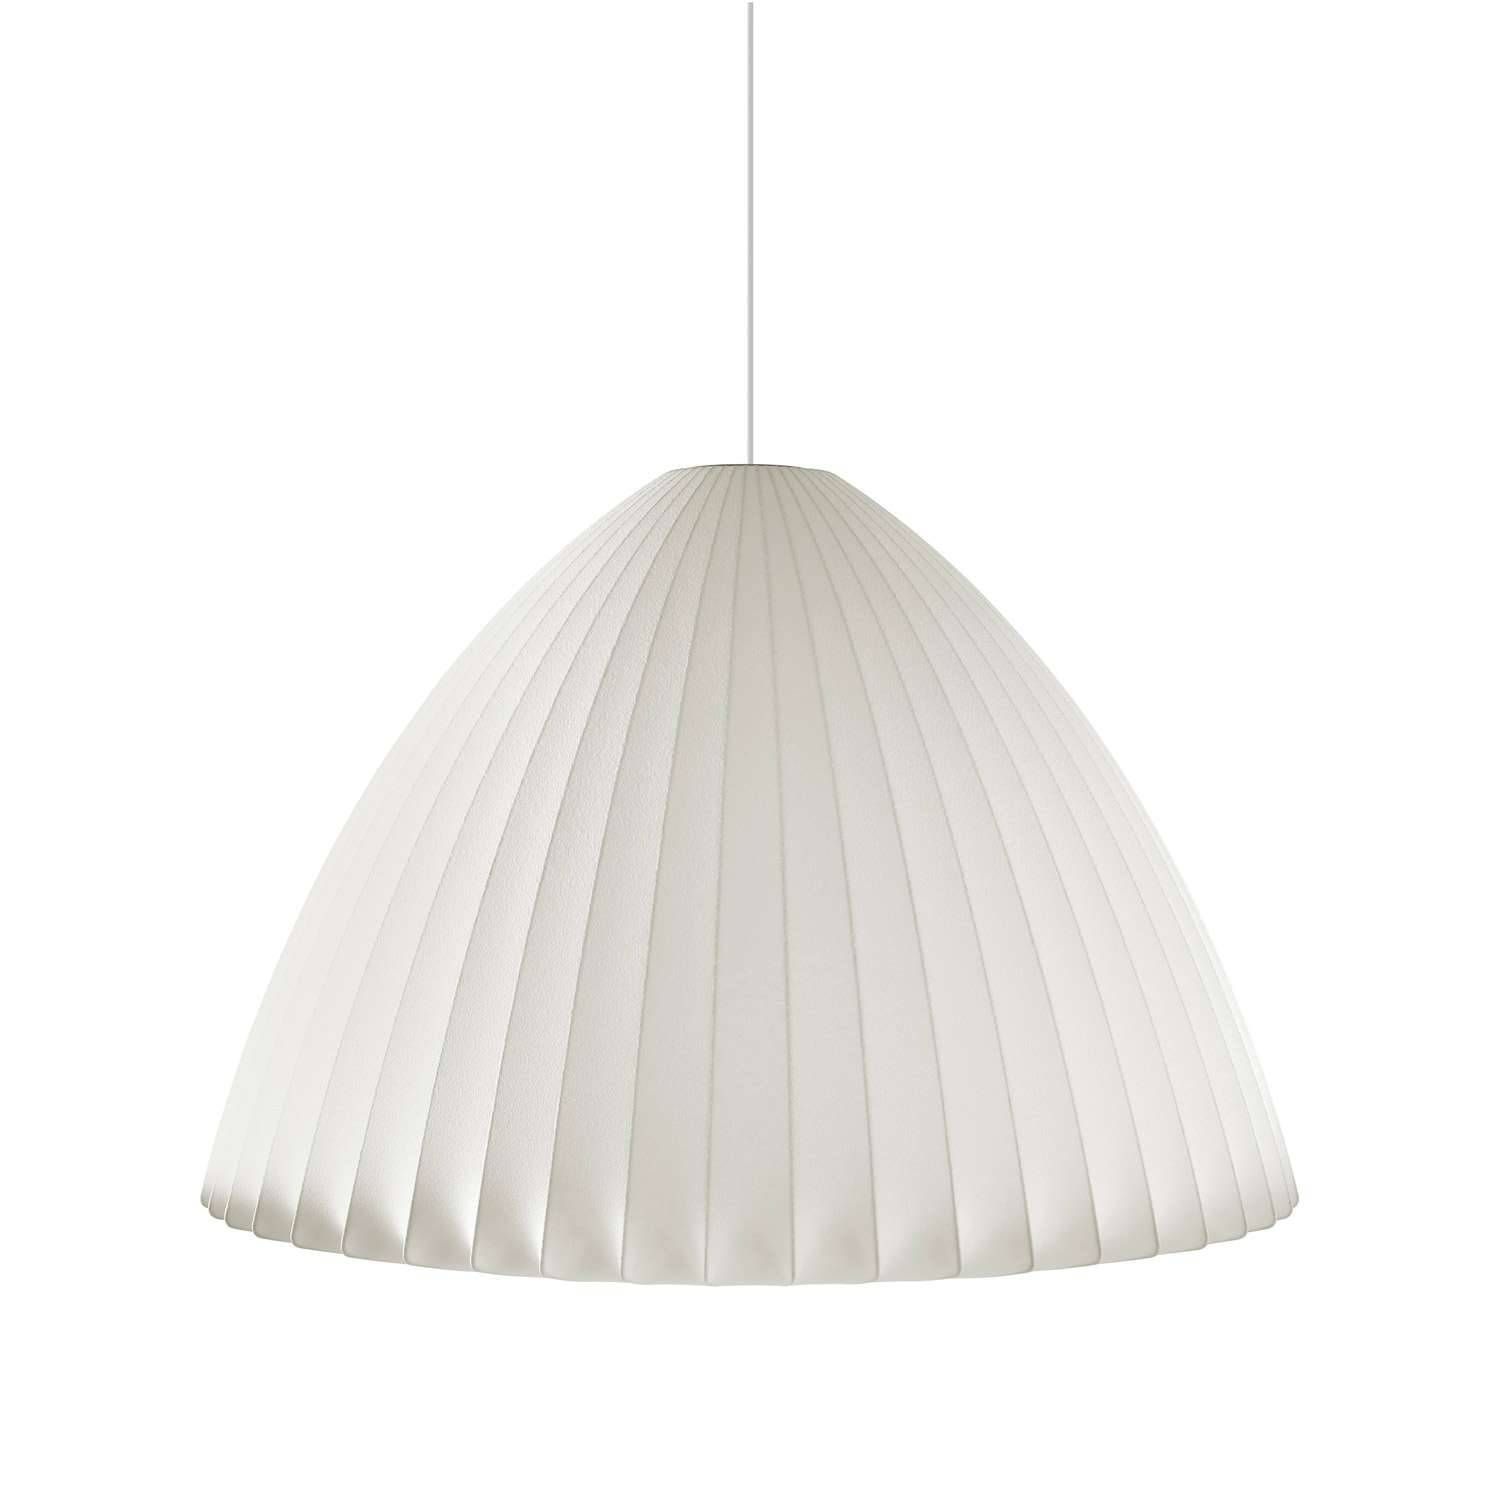 Nelson Bell Bubble Pendantnelson Bubble Lamps | Ylighting Pertaining To George Nelson Pendant Lights (View 15 of 15)